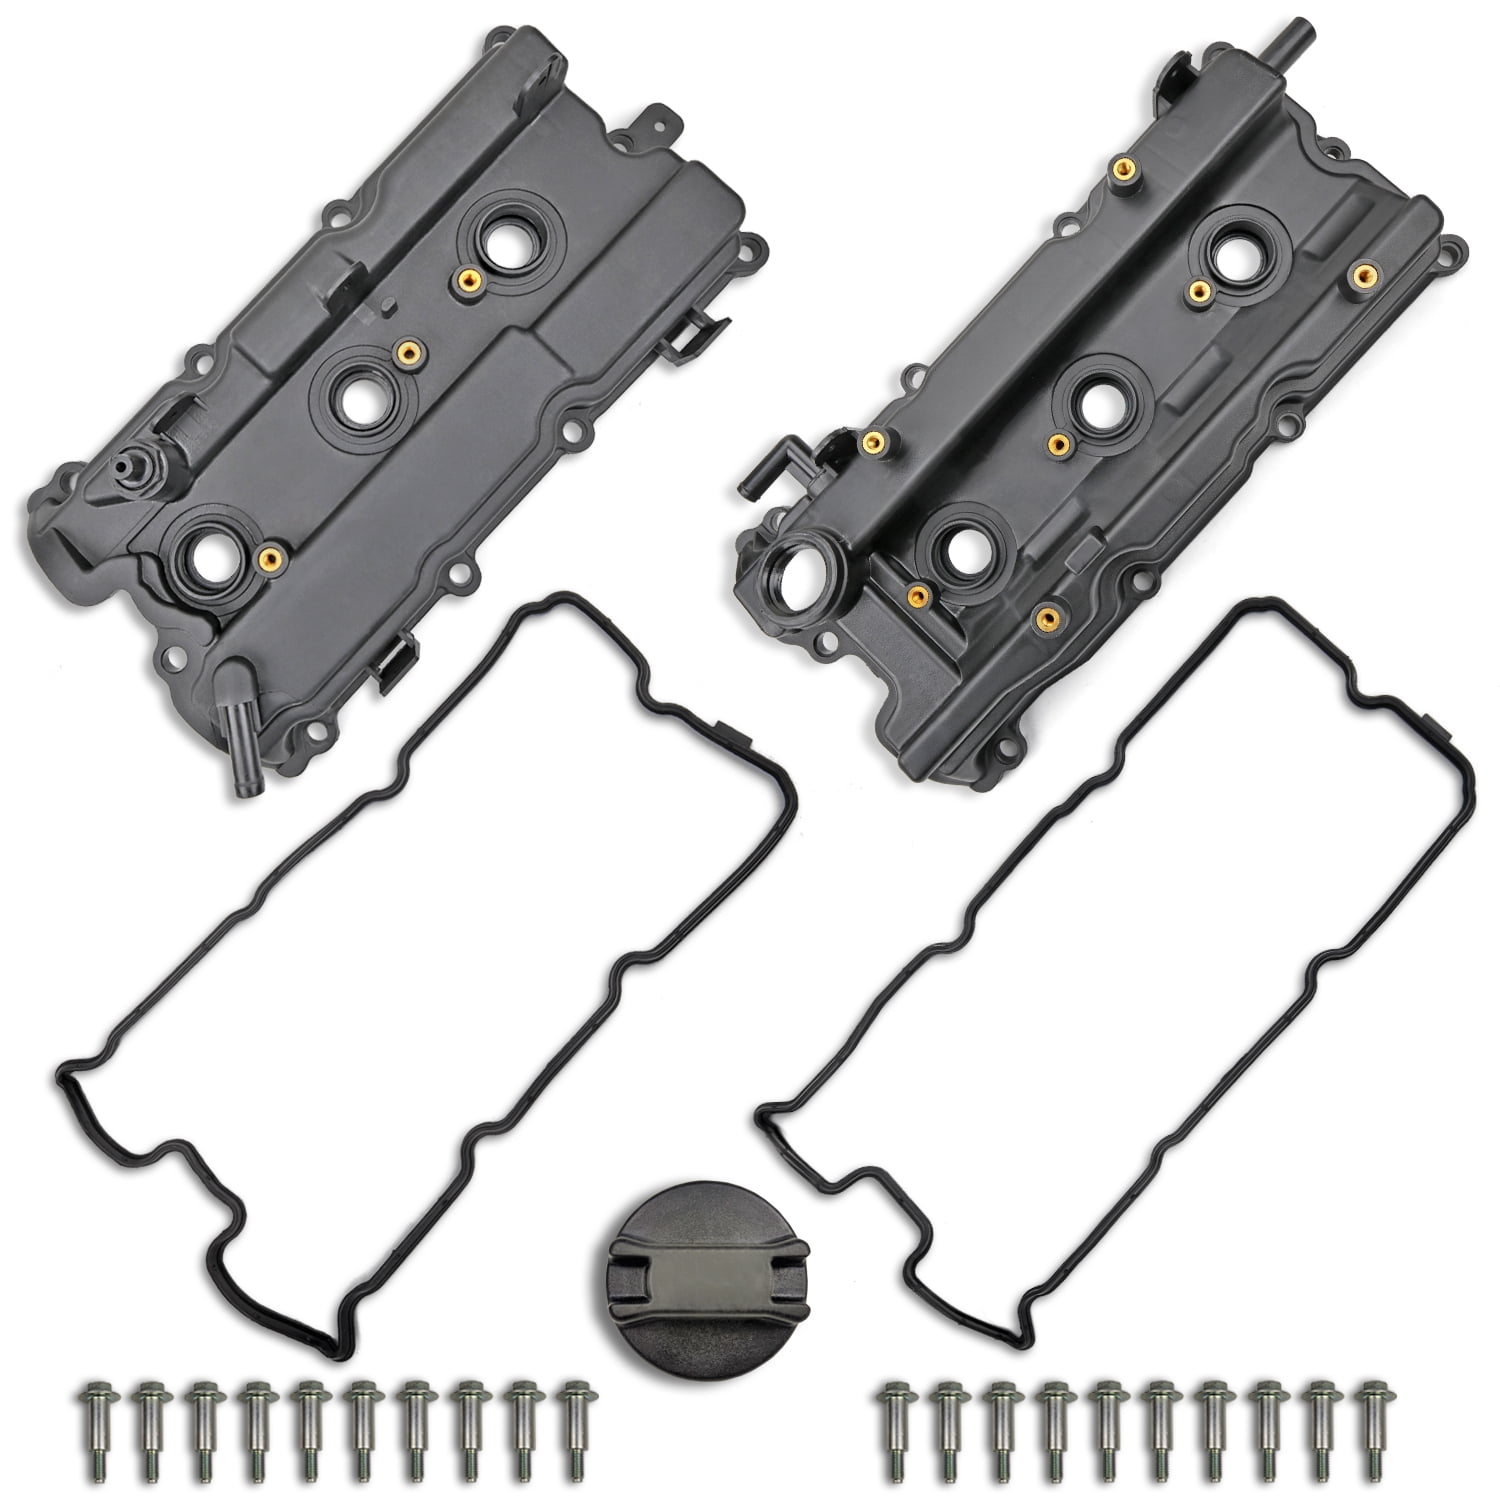 A-Premium Rear Right Engine Valve Cover with Gasket Compatible with Nissan Altima 2002-2006 Maxima 2002-2008 Quest 2004-2009 Murano 2003-2007 V6 3.5L 